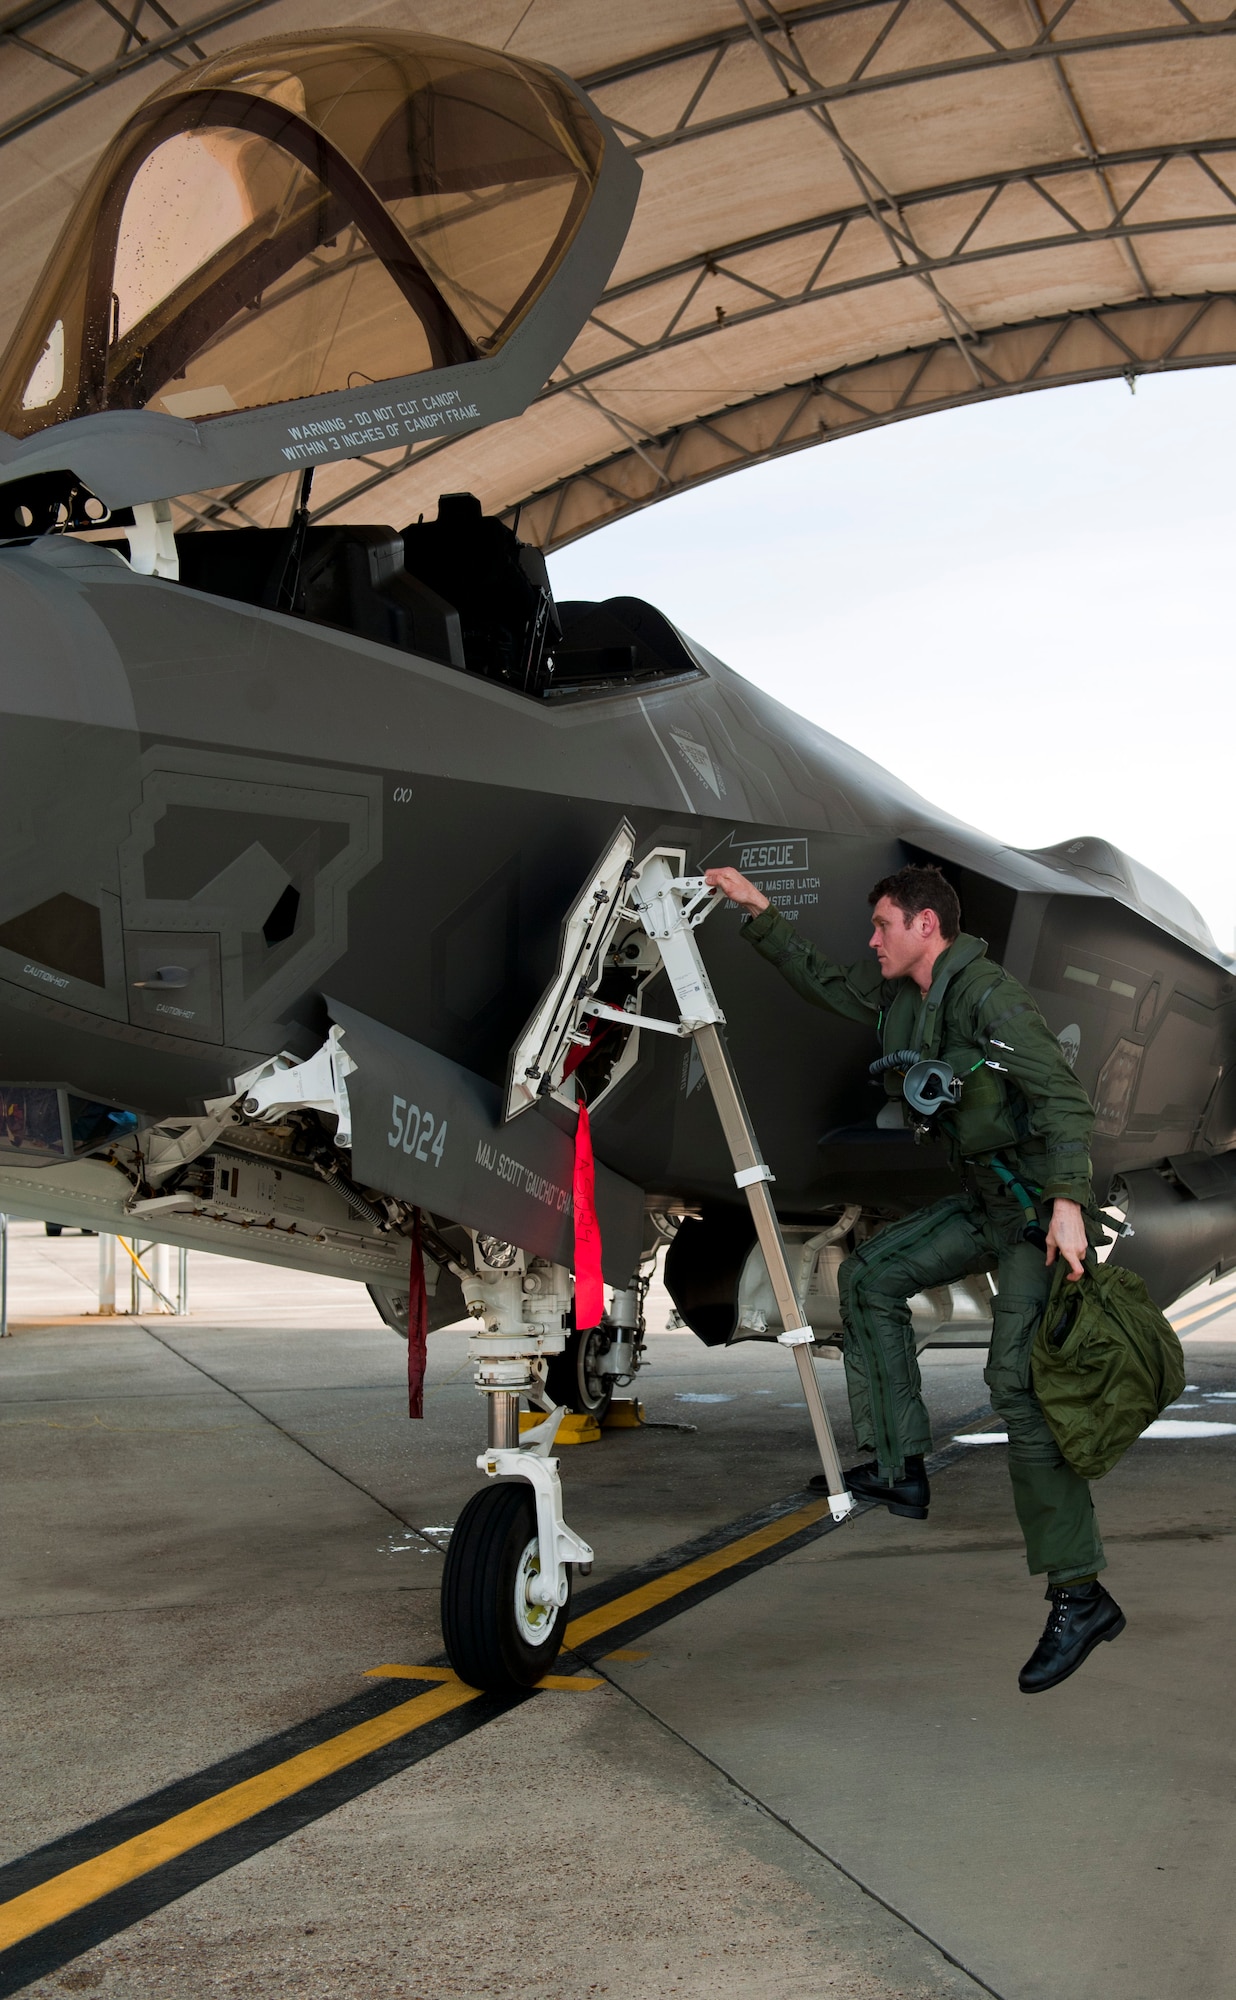 Royal Australian Air Force Squadron Leader Andrew Jackson, F-35 Lightning II student pilot, exits his F-35A after completing his first flight on Eglin Air Force Base, Fla., March 18, 2015. Jackson made history as the first Australian pilot to fly in the F-35A. The fifth-generation aircraft will meet Australia’s future air combat and strike needs, providing a networked force-multiplier effect in terms of situational awareness and combat effectiveness. (U.S. Air Force photo/Staff Sgt. Marleah Robertson)